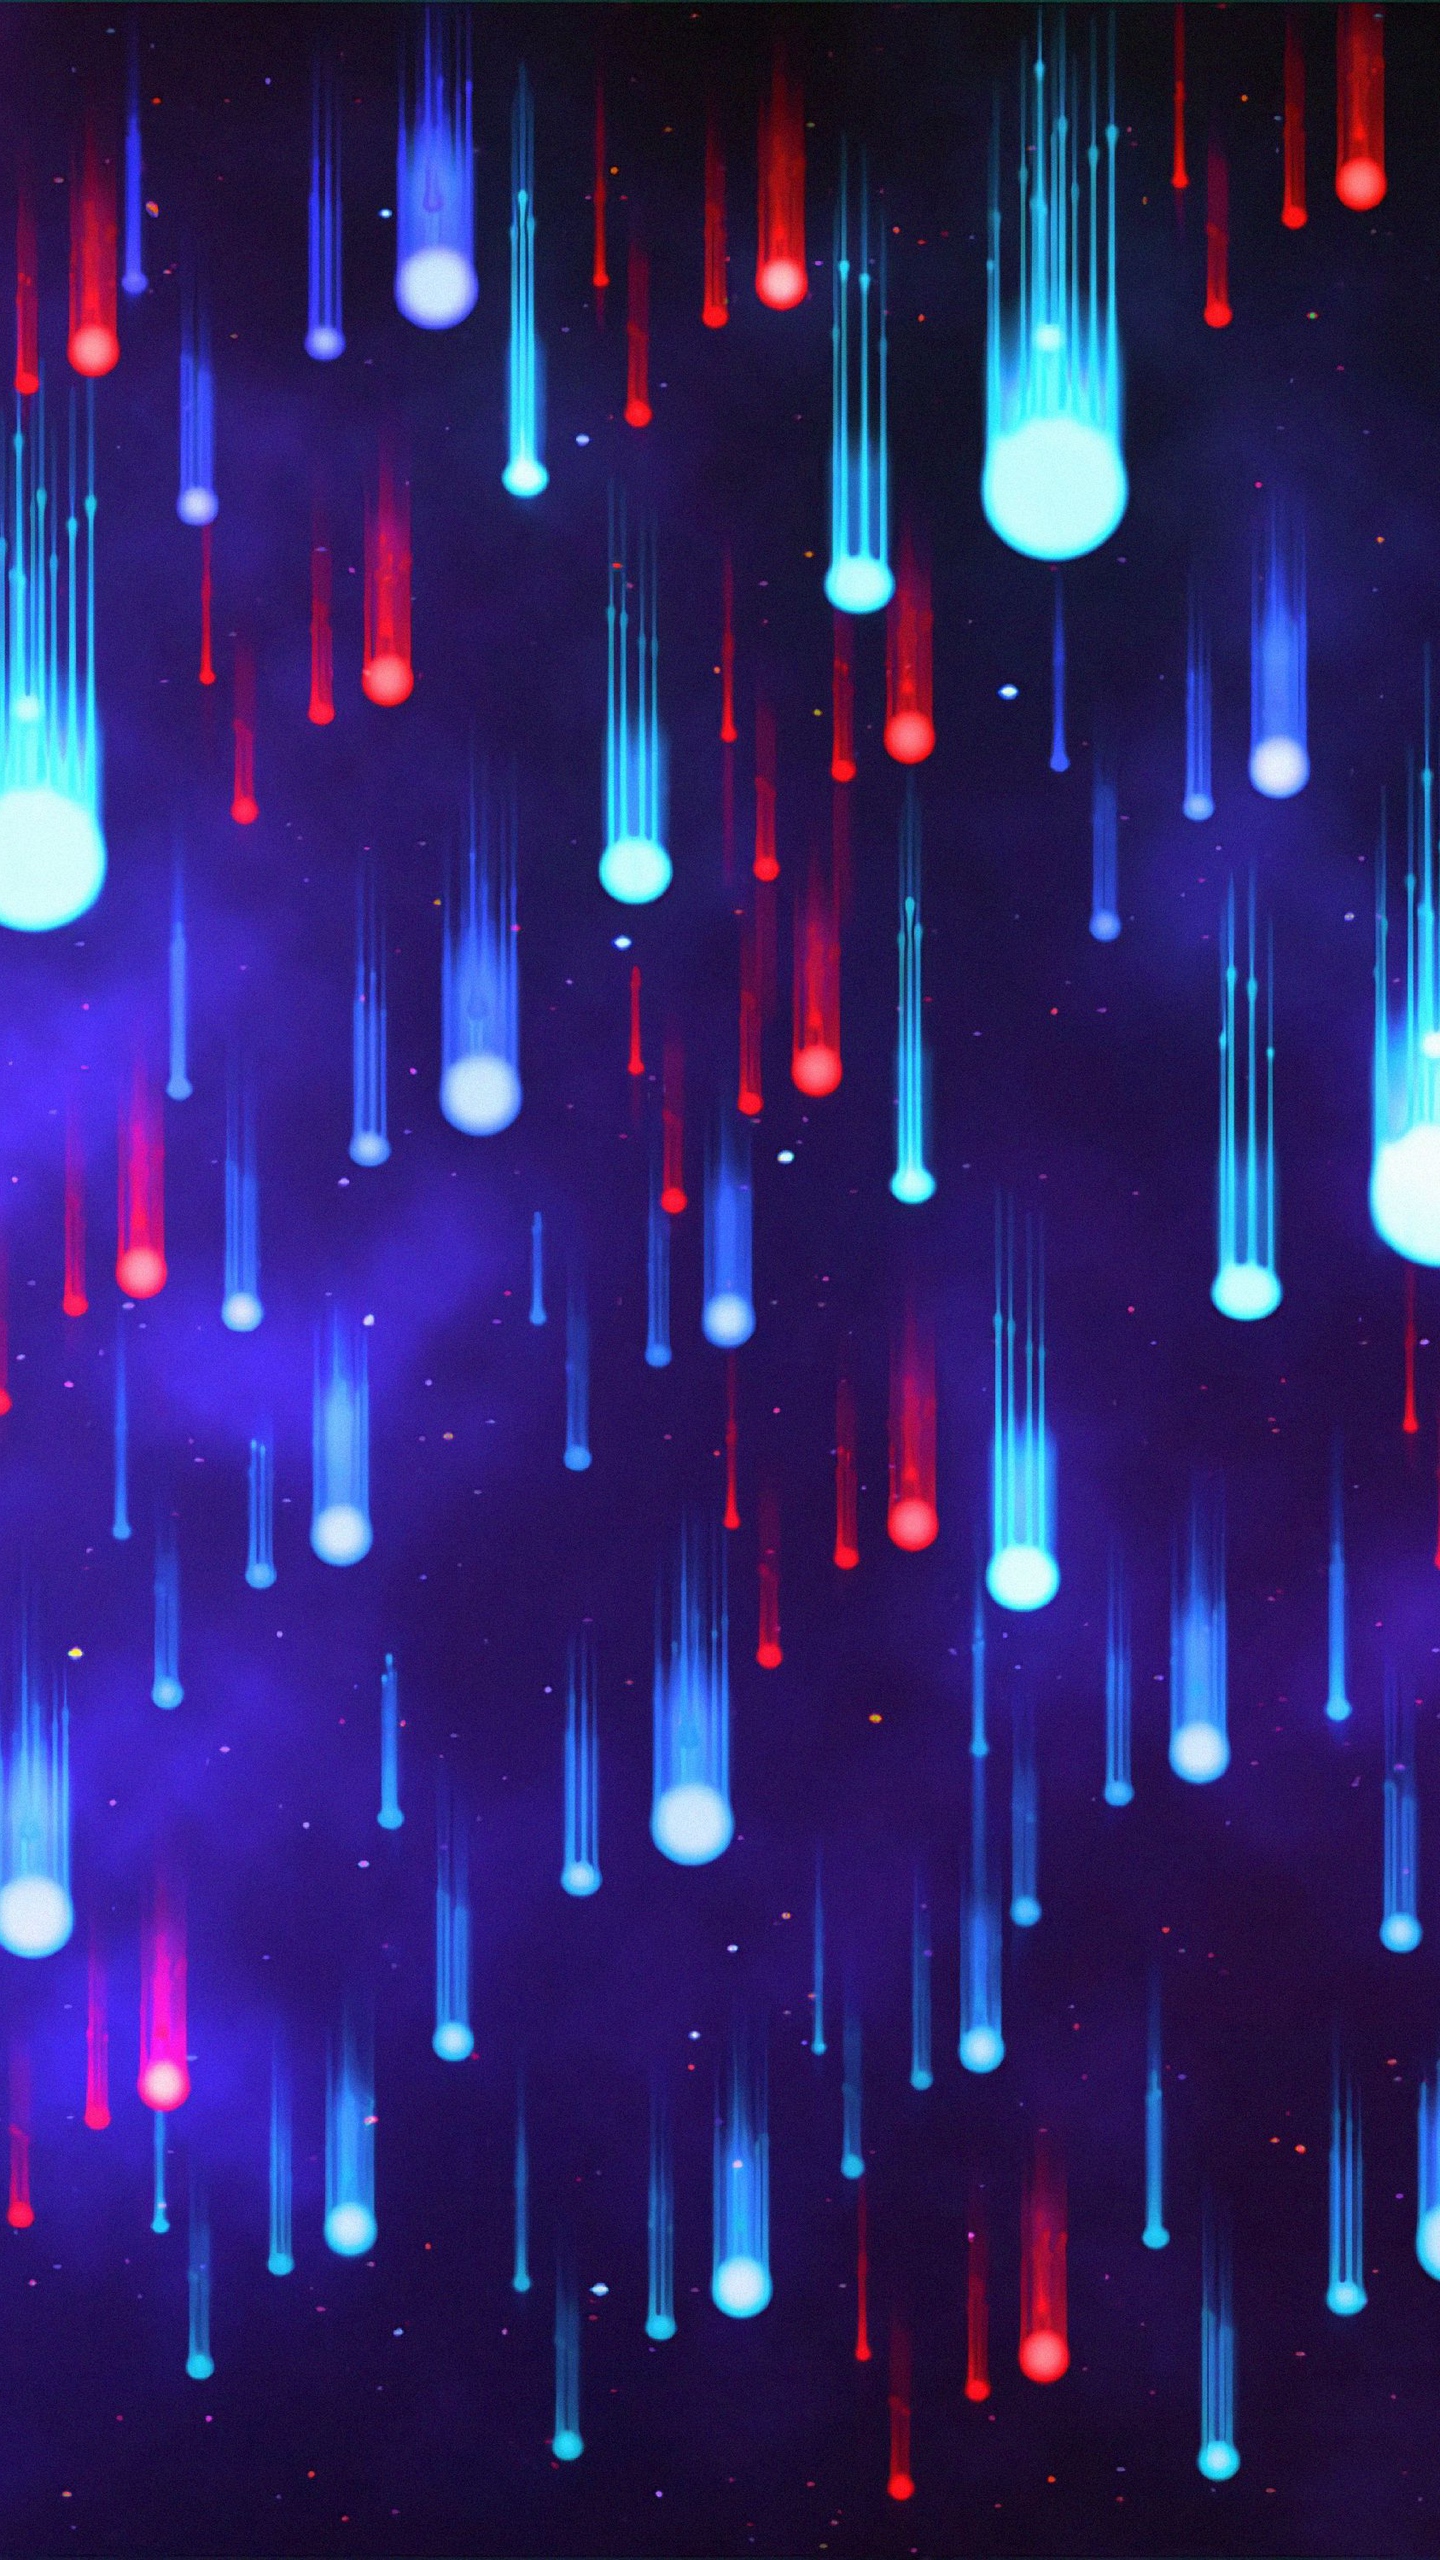 Wallpaper Drops, Neon, Colorful, Patterns - Galaxy Cool Phone Backgrounds -  1440x2560 Wallpaper 